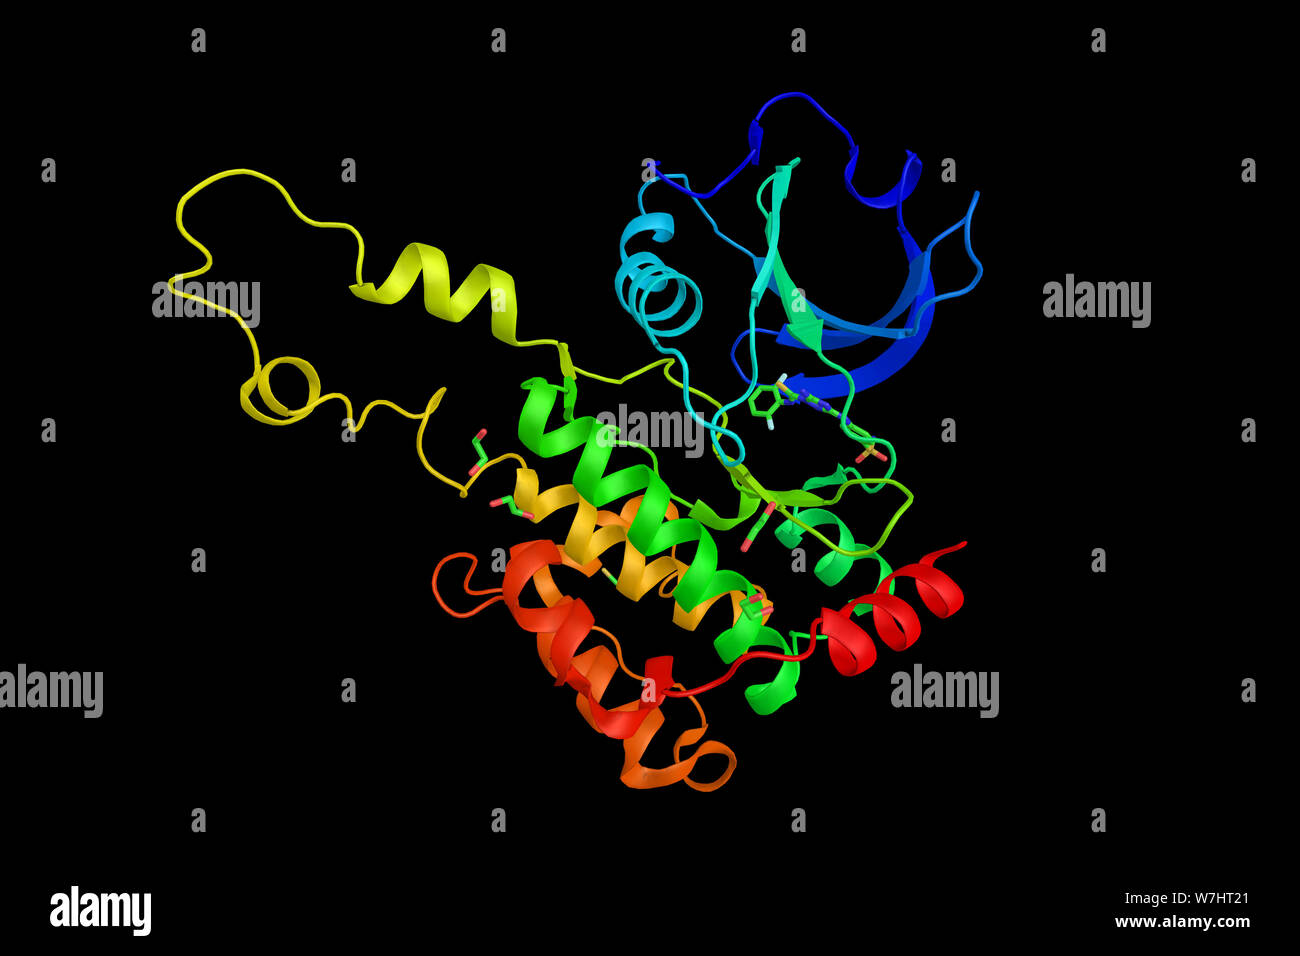 STE20-like serine/threonine-protein kinase, an enzyme shown to interact with PDZK1. 3d rendering. Stock Photo